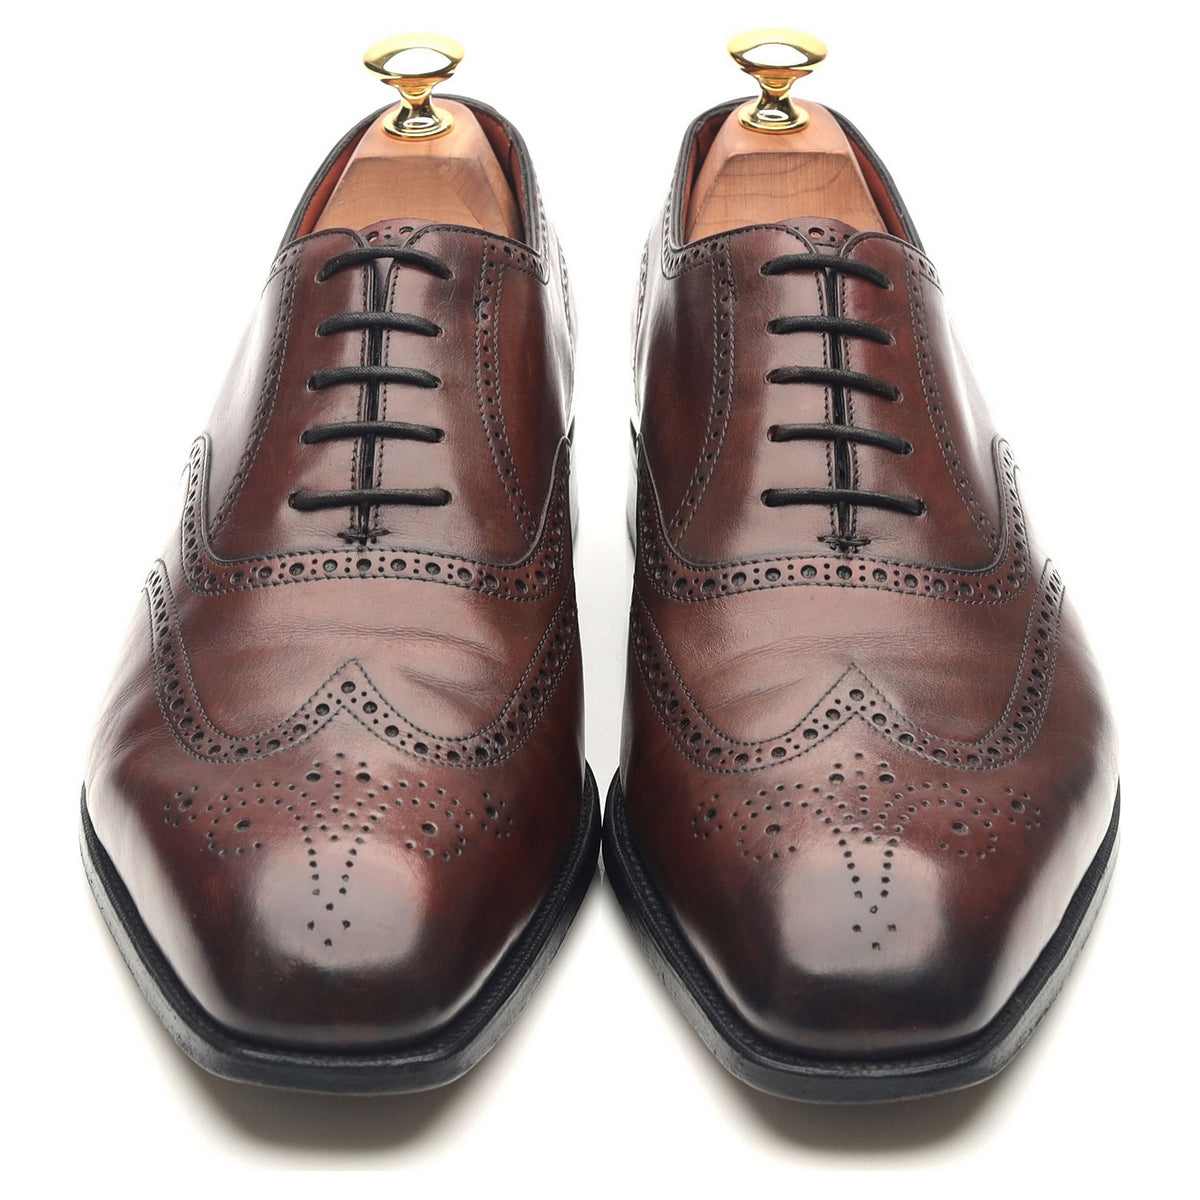 &#39;Inverness&#39; Burgundy Leather Oxford Brogues UK 9 E